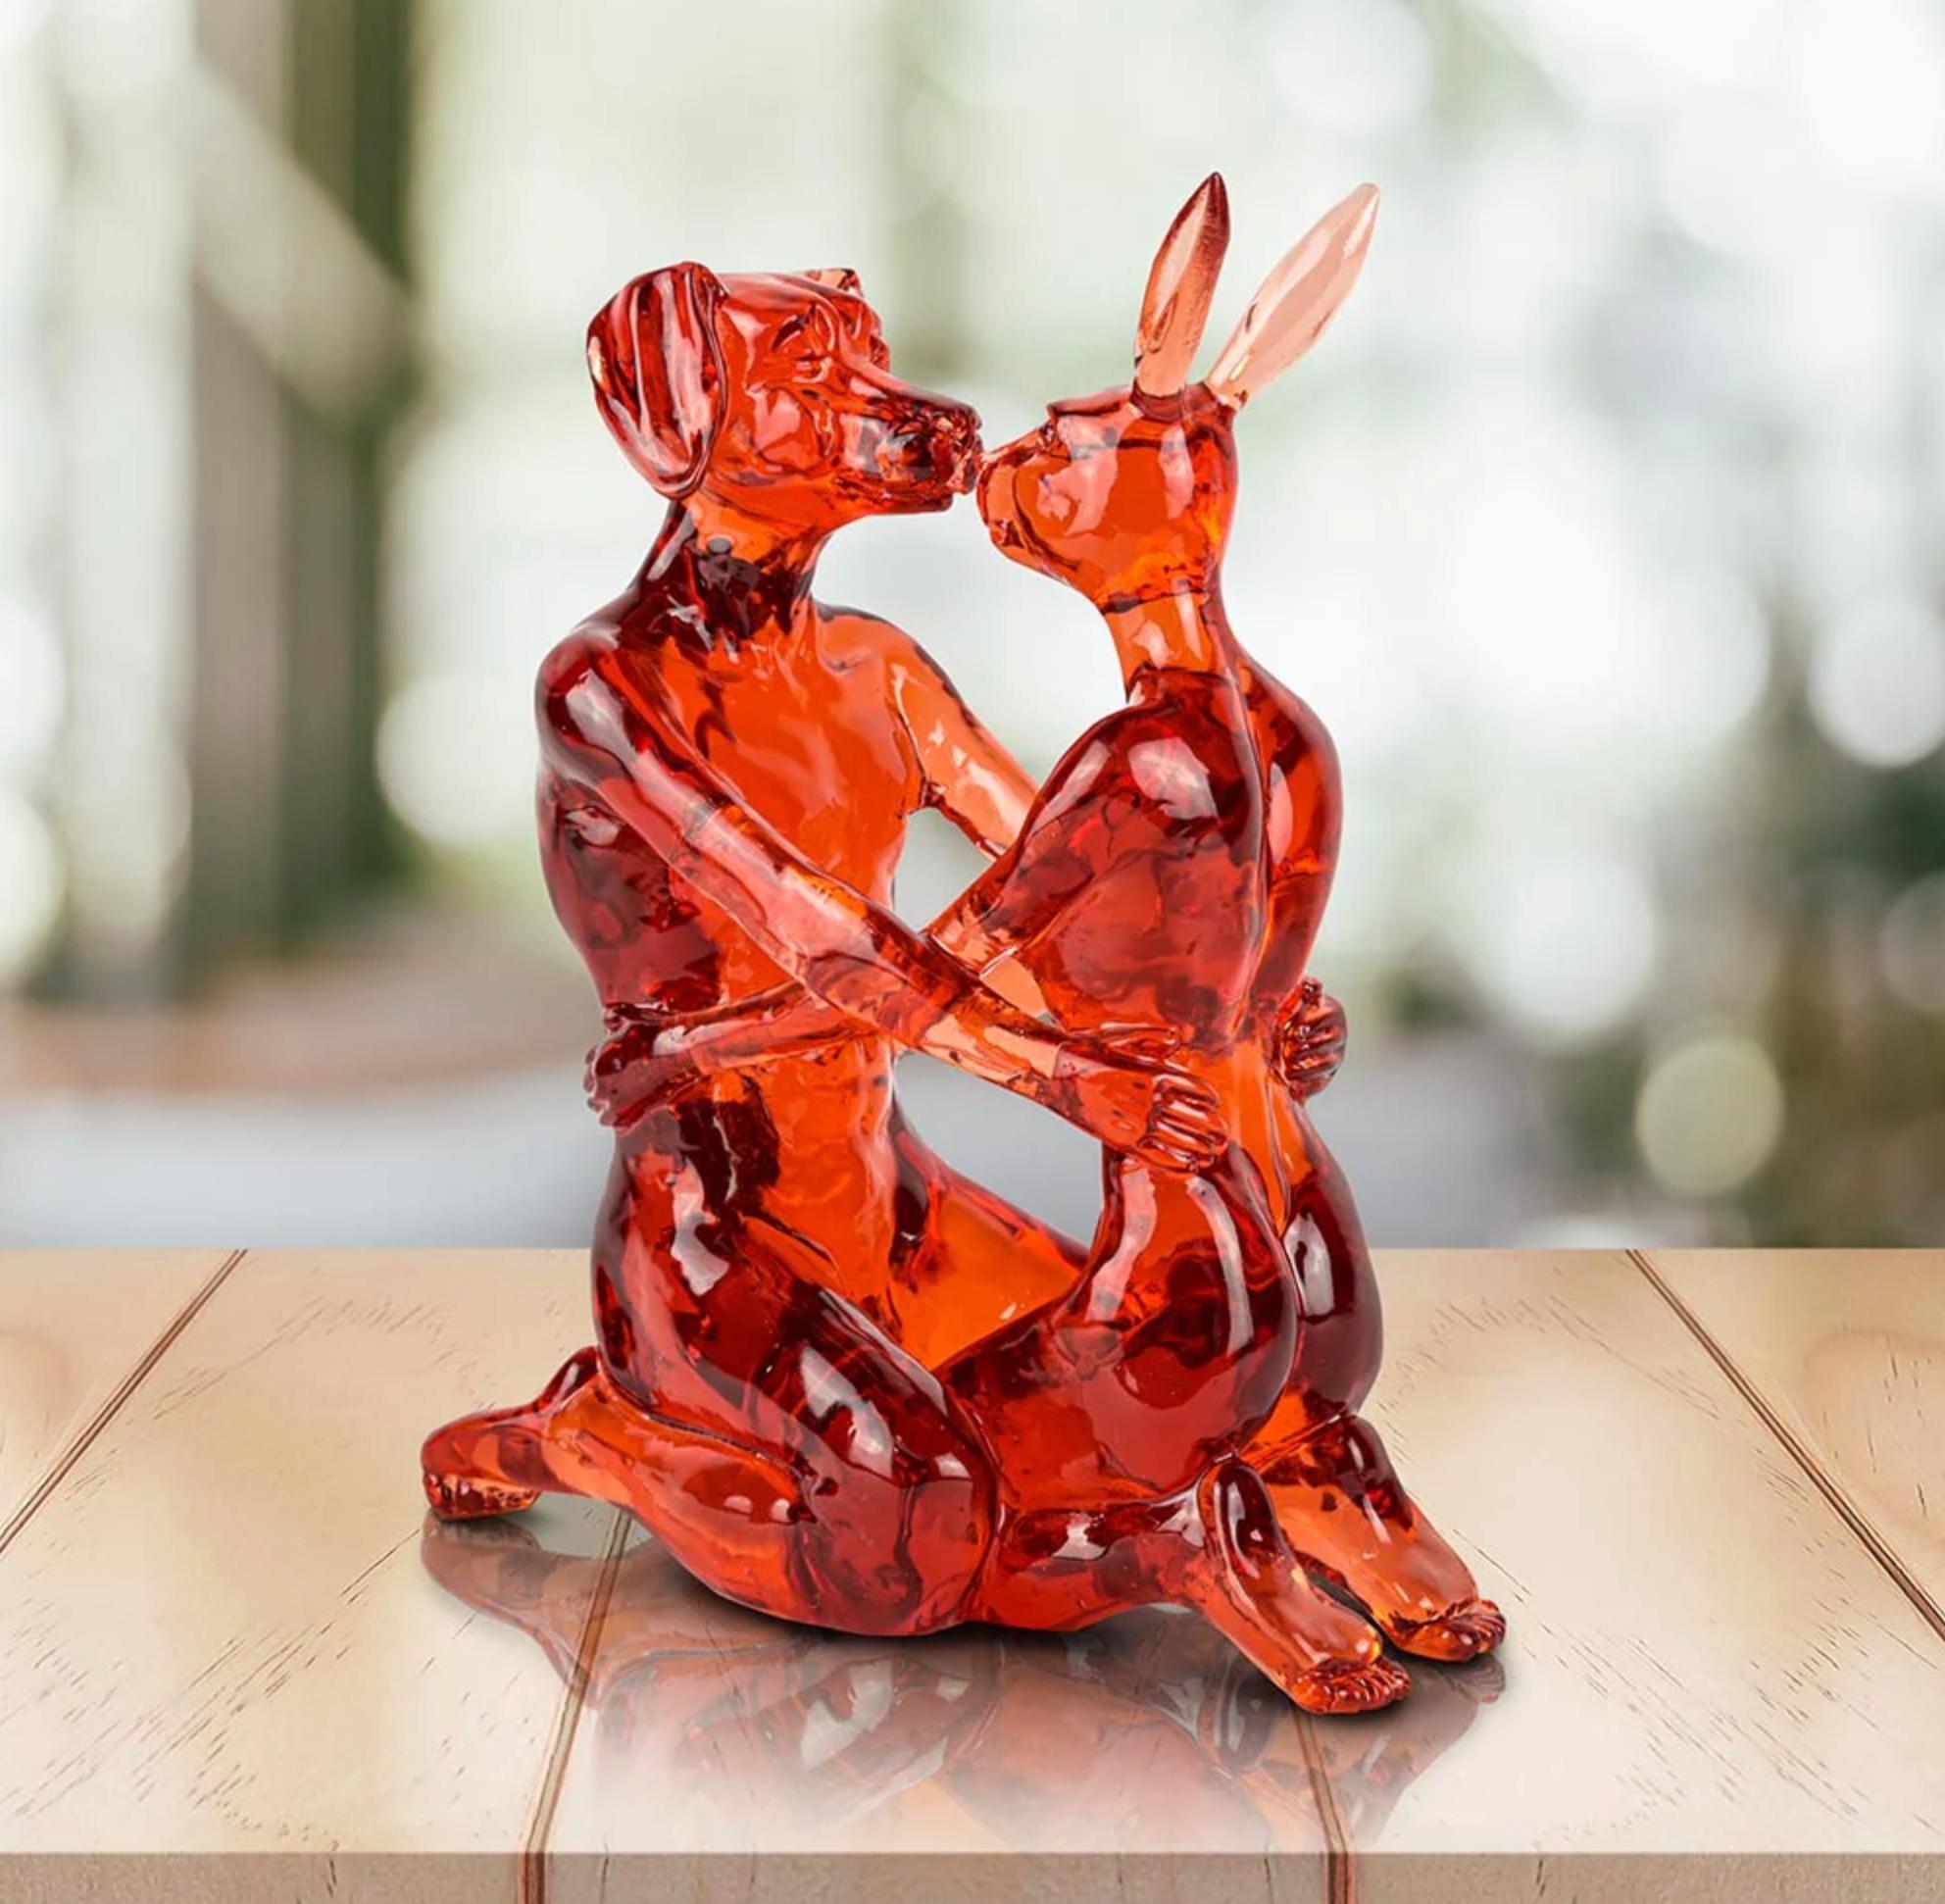 Title: They were the best lolly kissers (Red)
Authentic Small Resin Sculpture

This authentic bronze sculpture titled 'They were the best lolly kissers' by artists Gillie and Marc has been meticulously crafted in red resin . This sculpture features